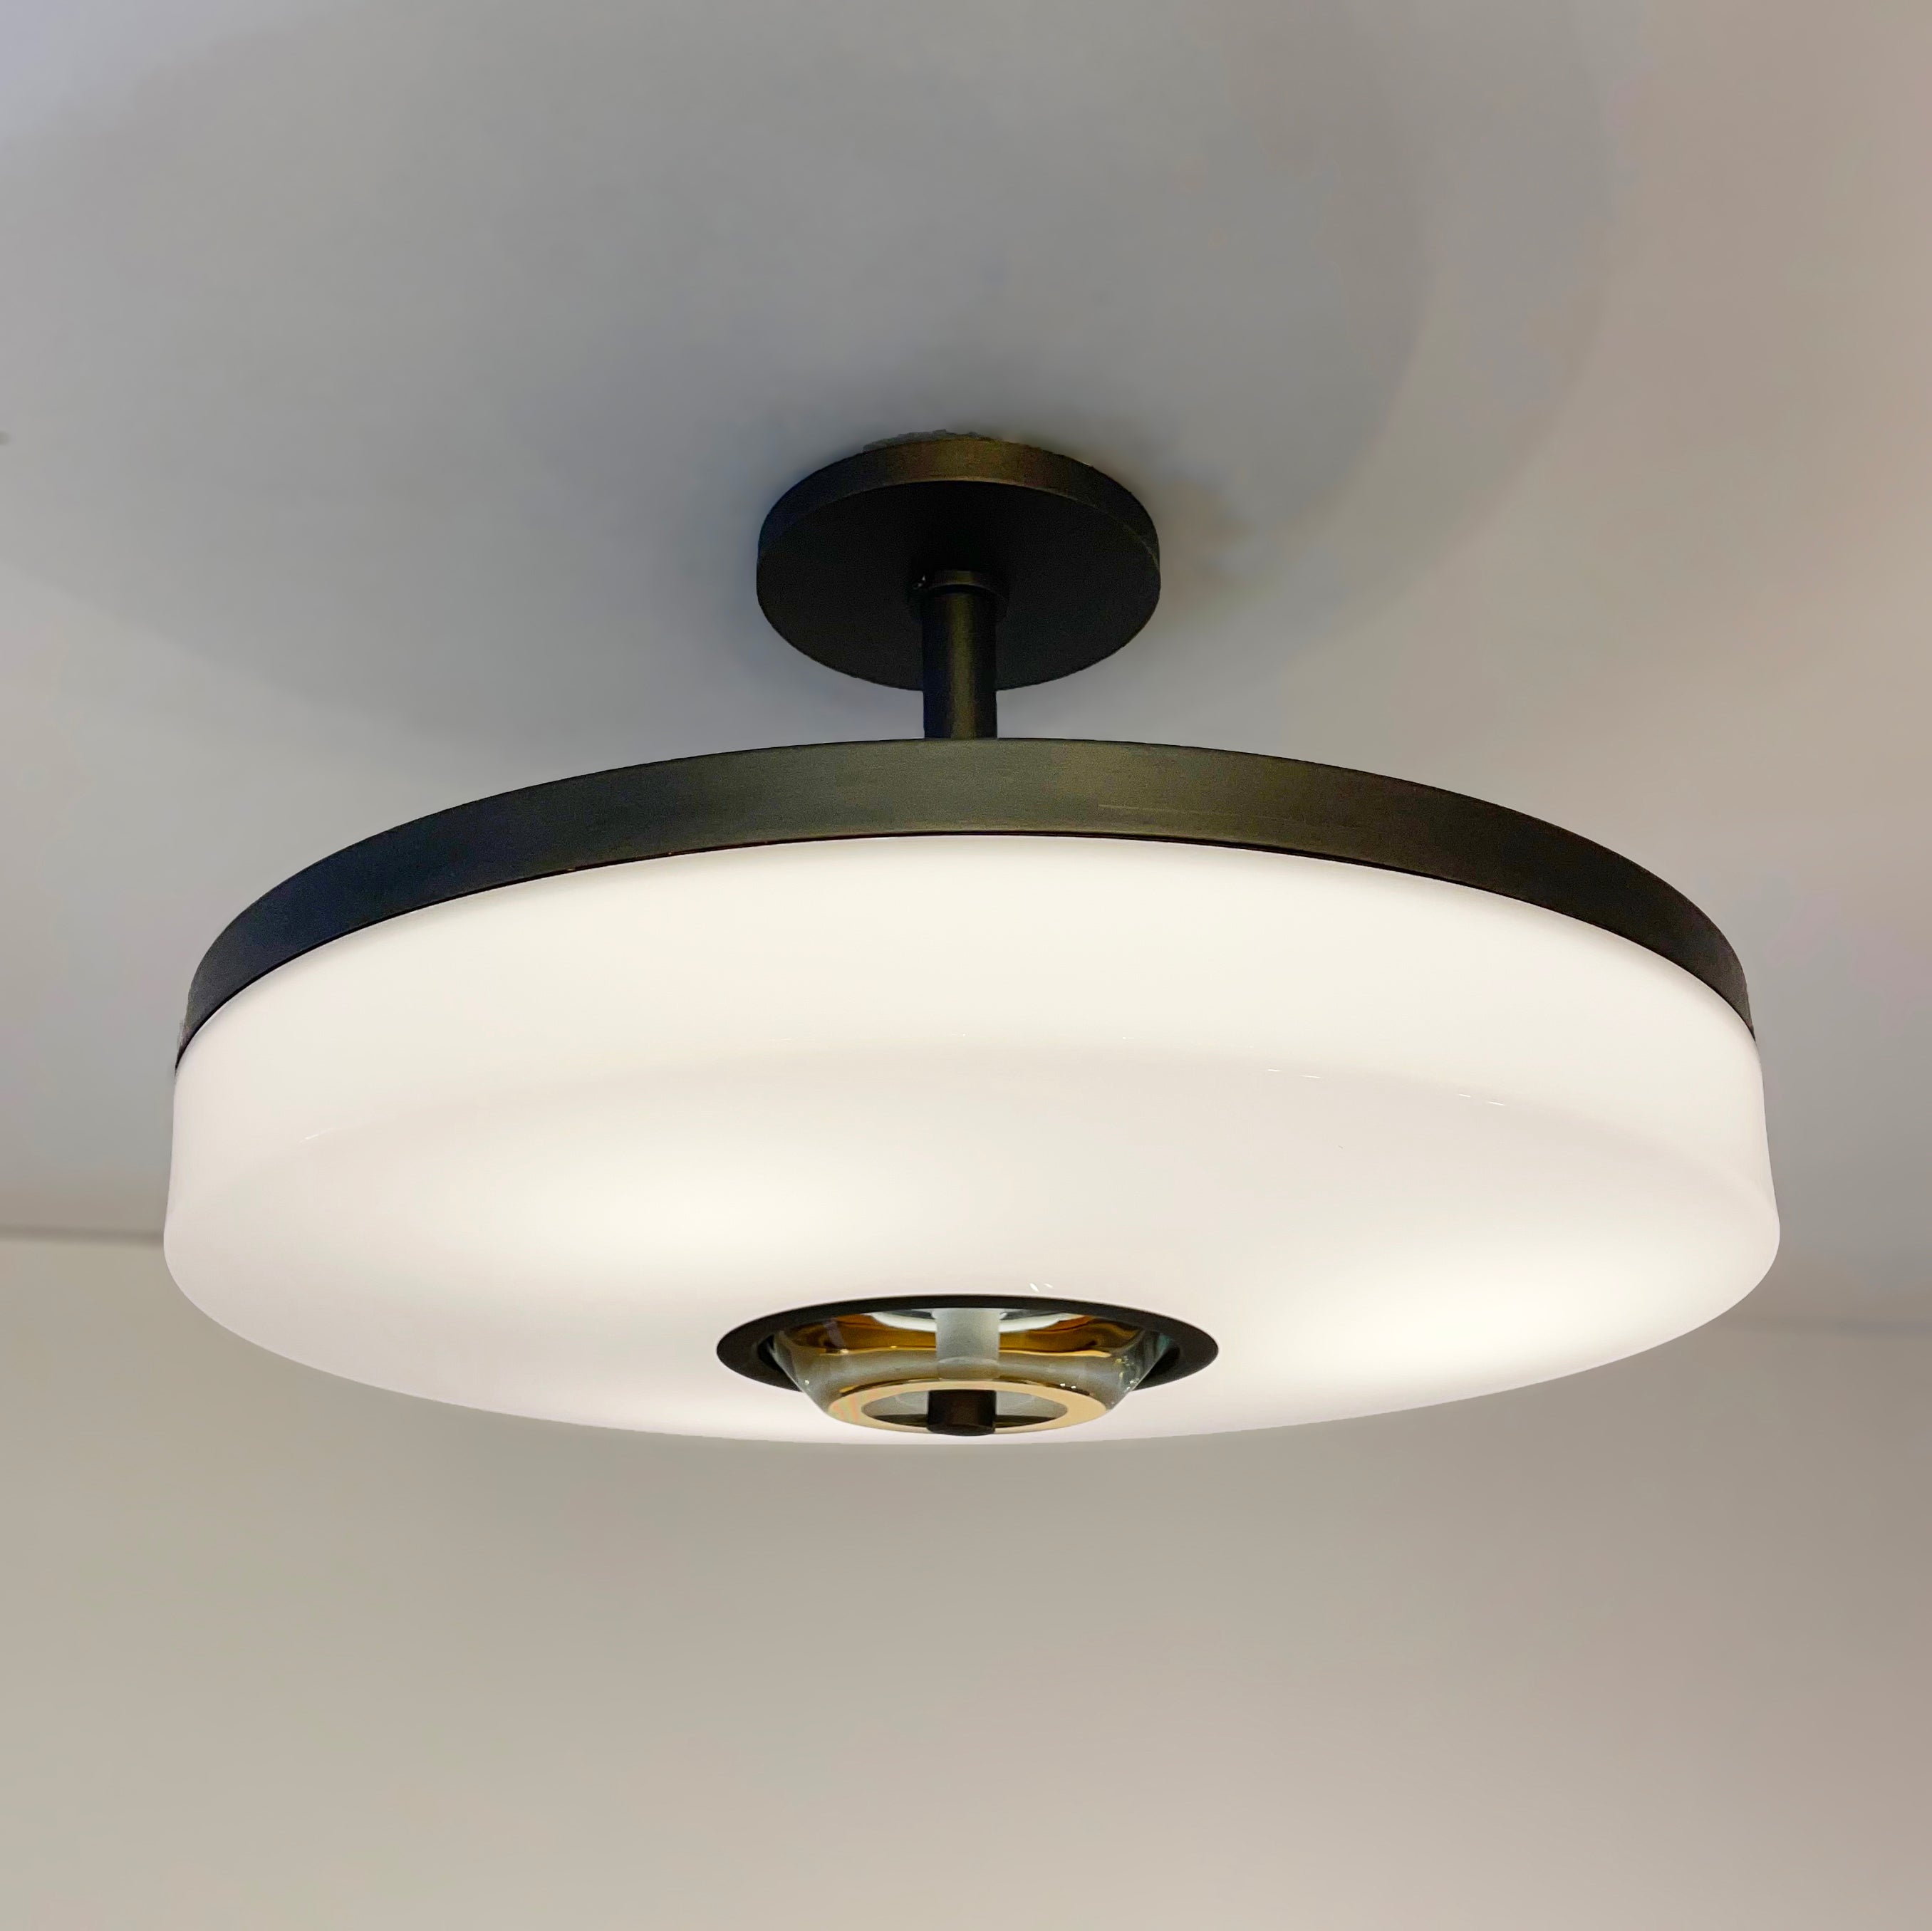 Italian Iris Piccolo Ceiling Light by form A- White Glass Version